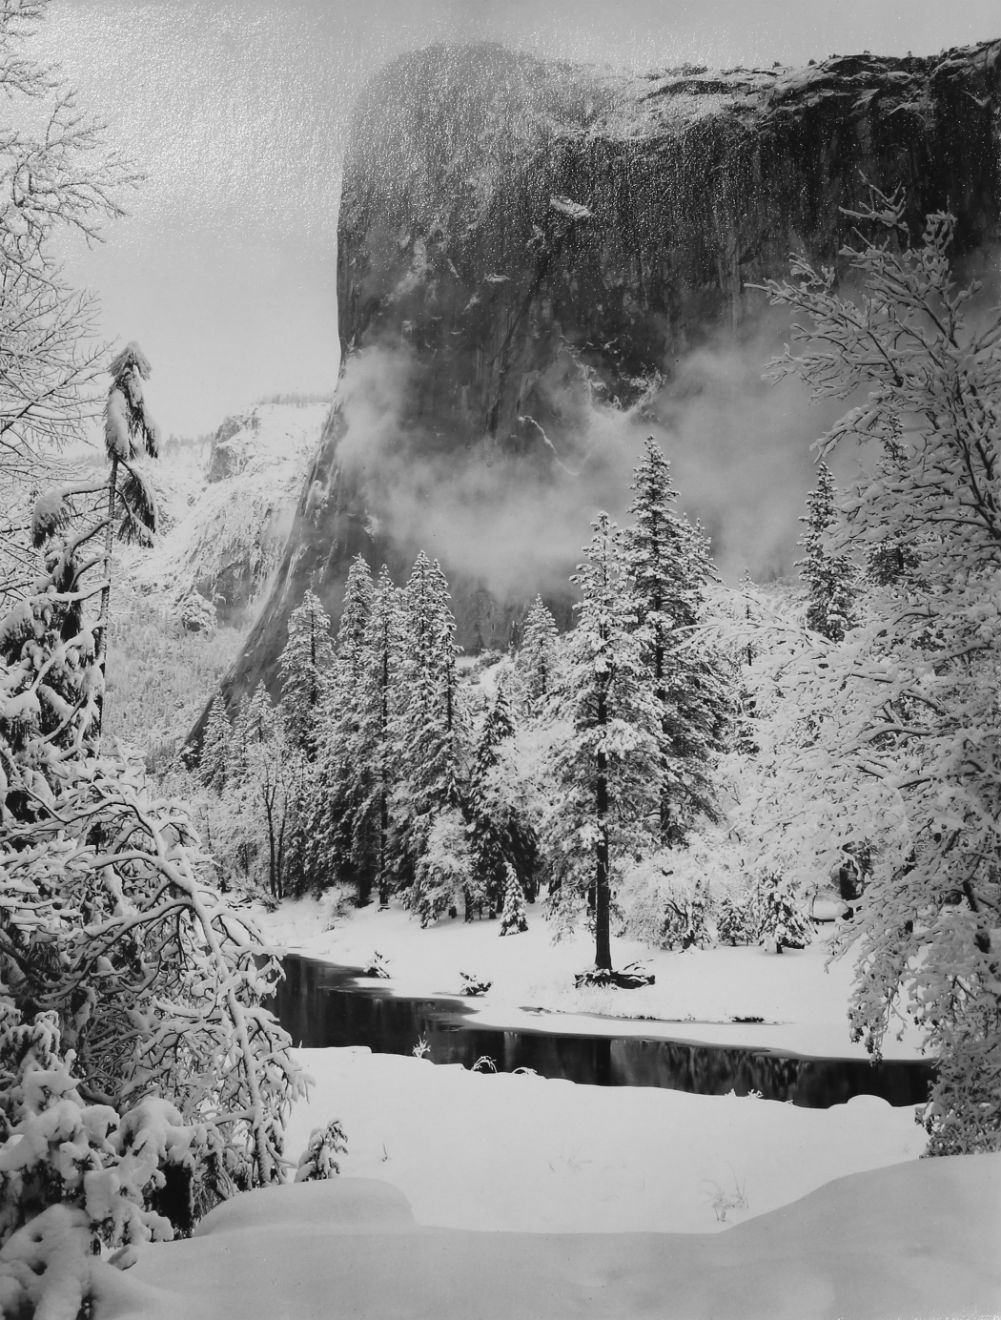 ‘El Capitan, Winter, Yosemite National Park,’ 1948, by Ansel Adams (American, 1902-1984) will be offered for $2,000-$4,000. Cars Auction Gallery image